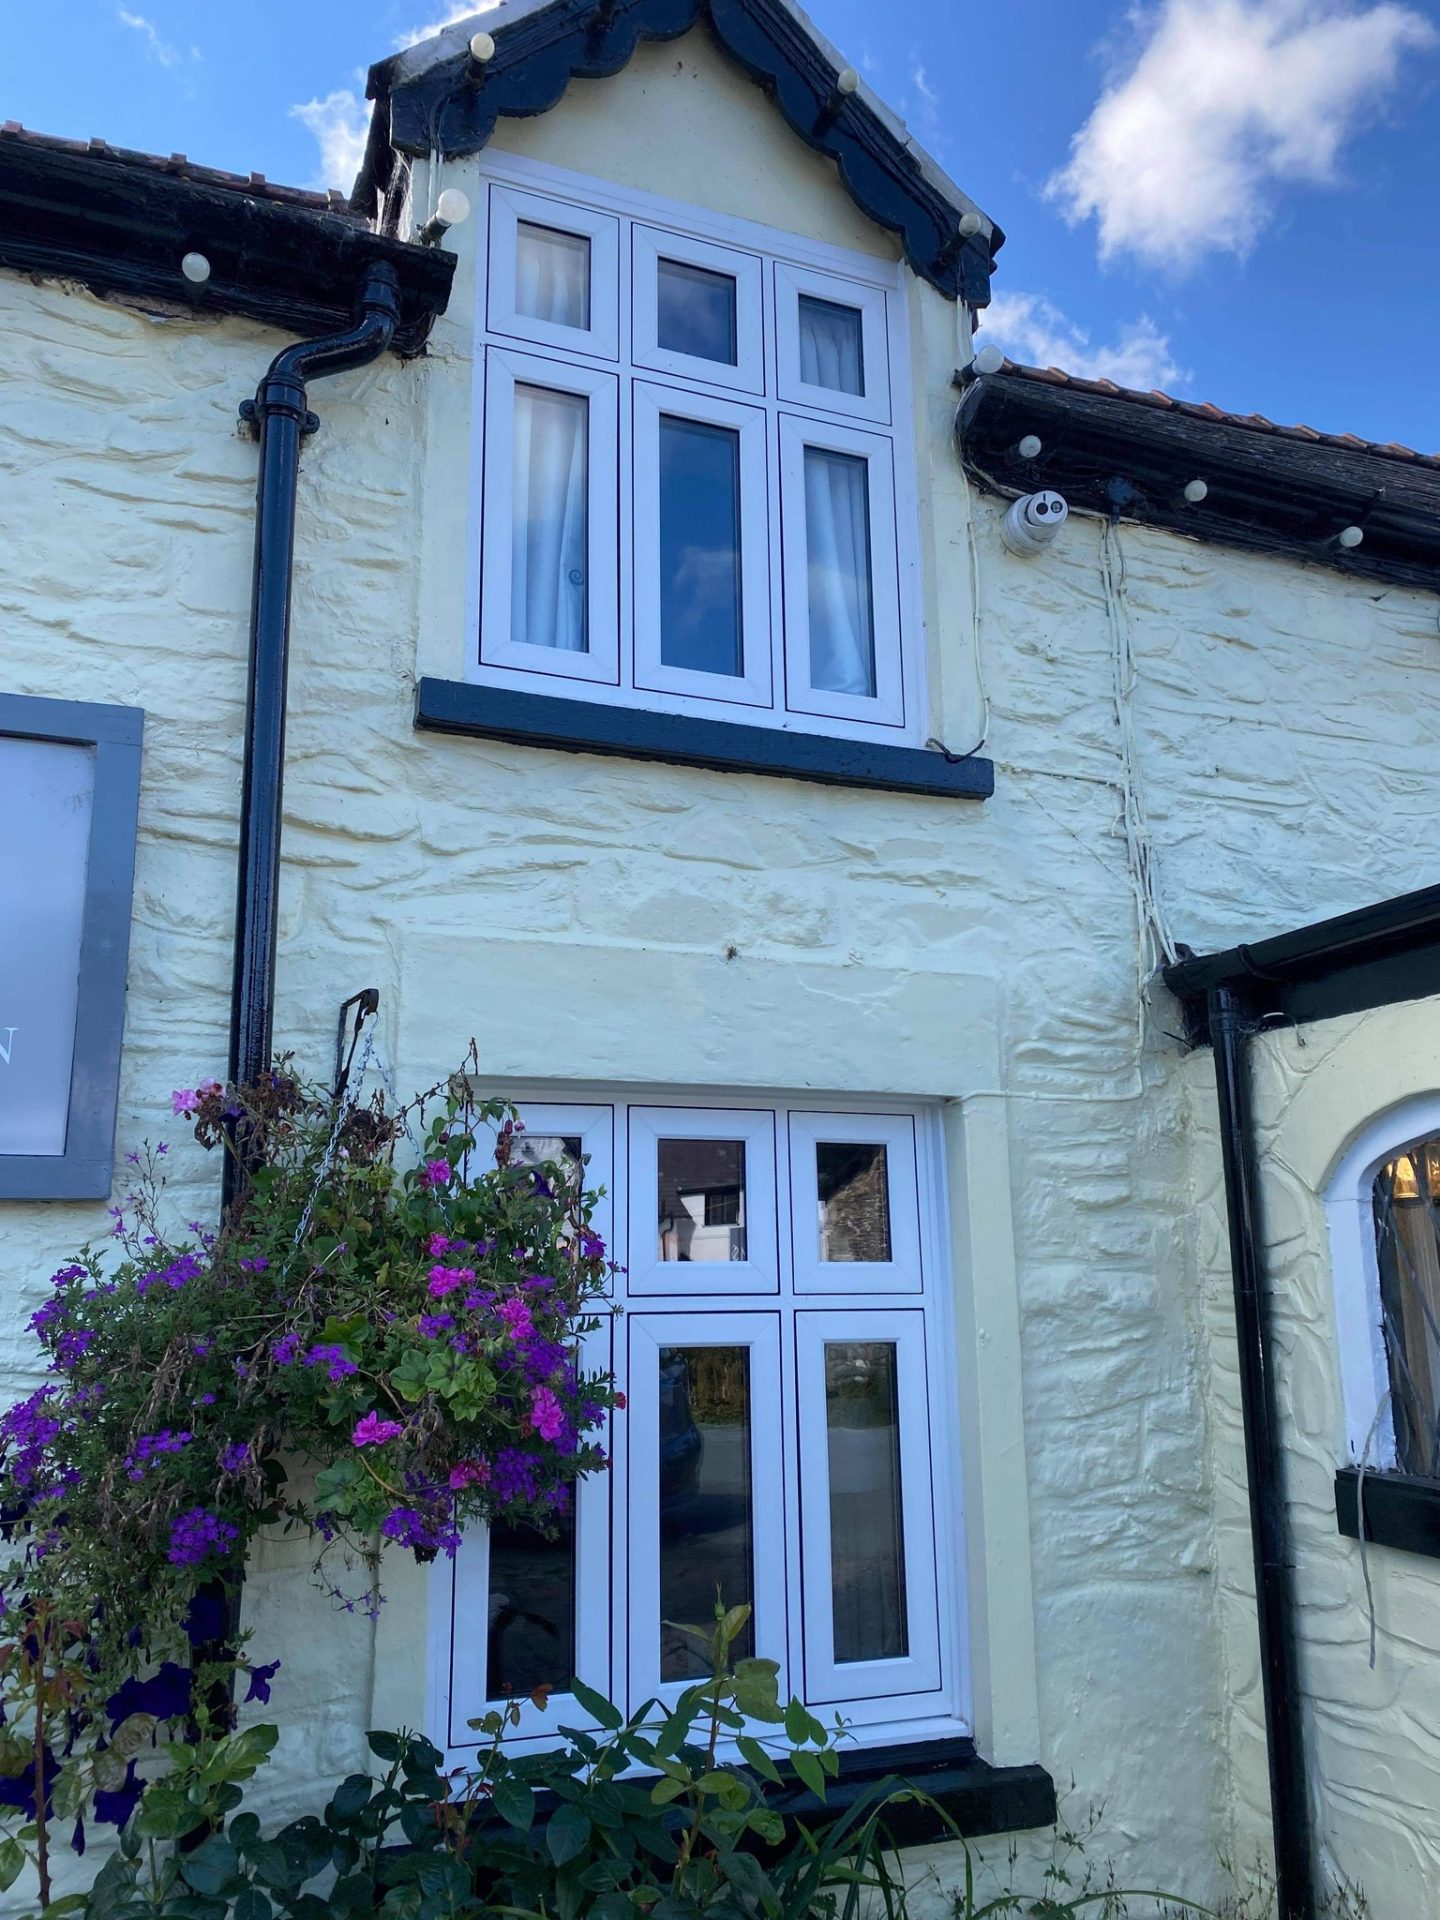 raditional white cottage with a textured finish, adorned with dark-trimmed uPVC casement windows. The upper window sits within a gabled dormer, while the lower window is framed by cascading purple flowers from a hanging basket, adding a vibrant splash of color to the quaint facade.